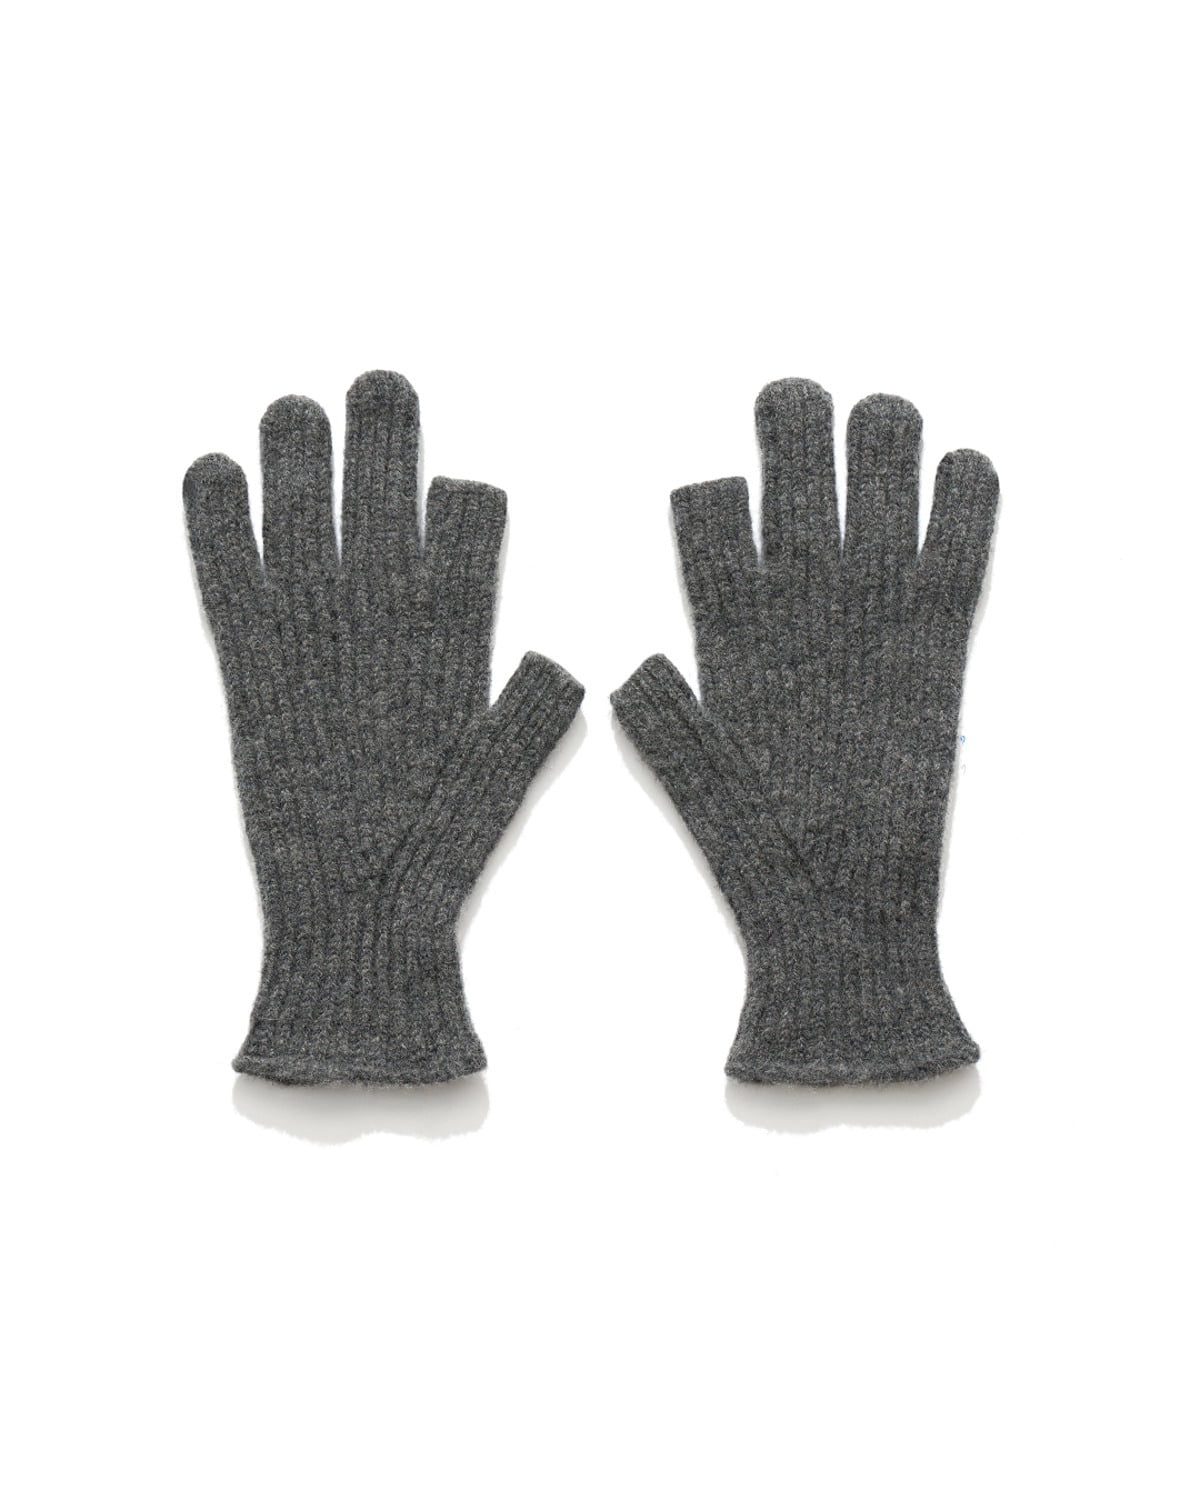 CLYDE GLOVE / CHARCOAL